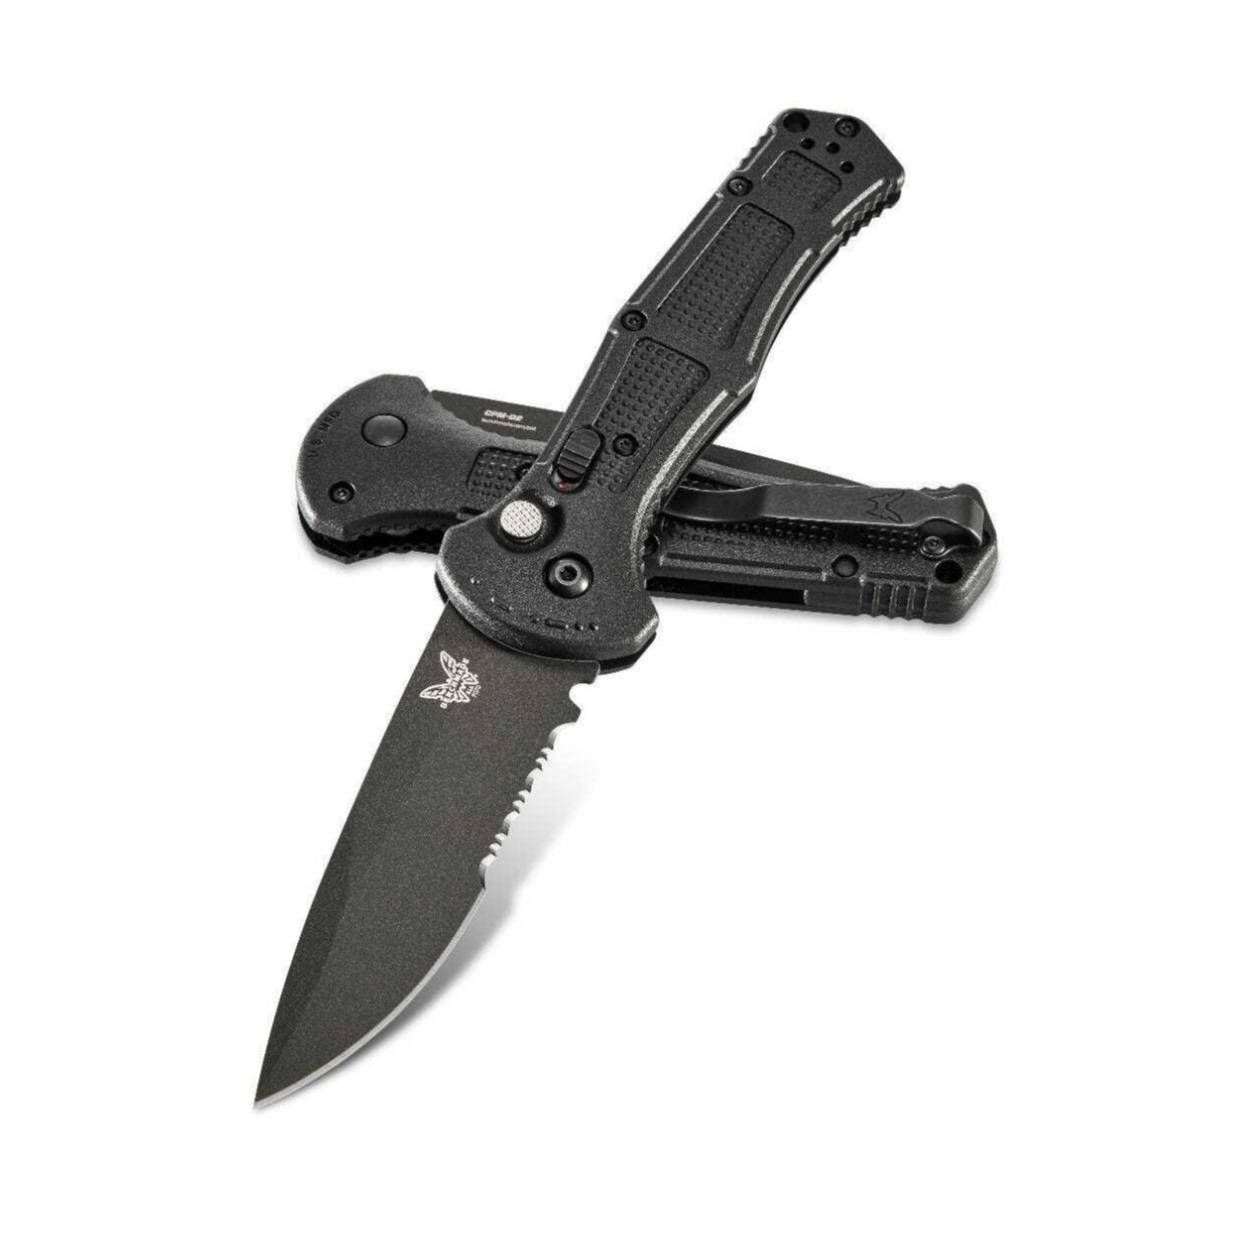 Benchmade 9070SBK Claymore Auto Folding Knife 3.6-Inch CPM-D2 Blade Combo (Cobalt Black)